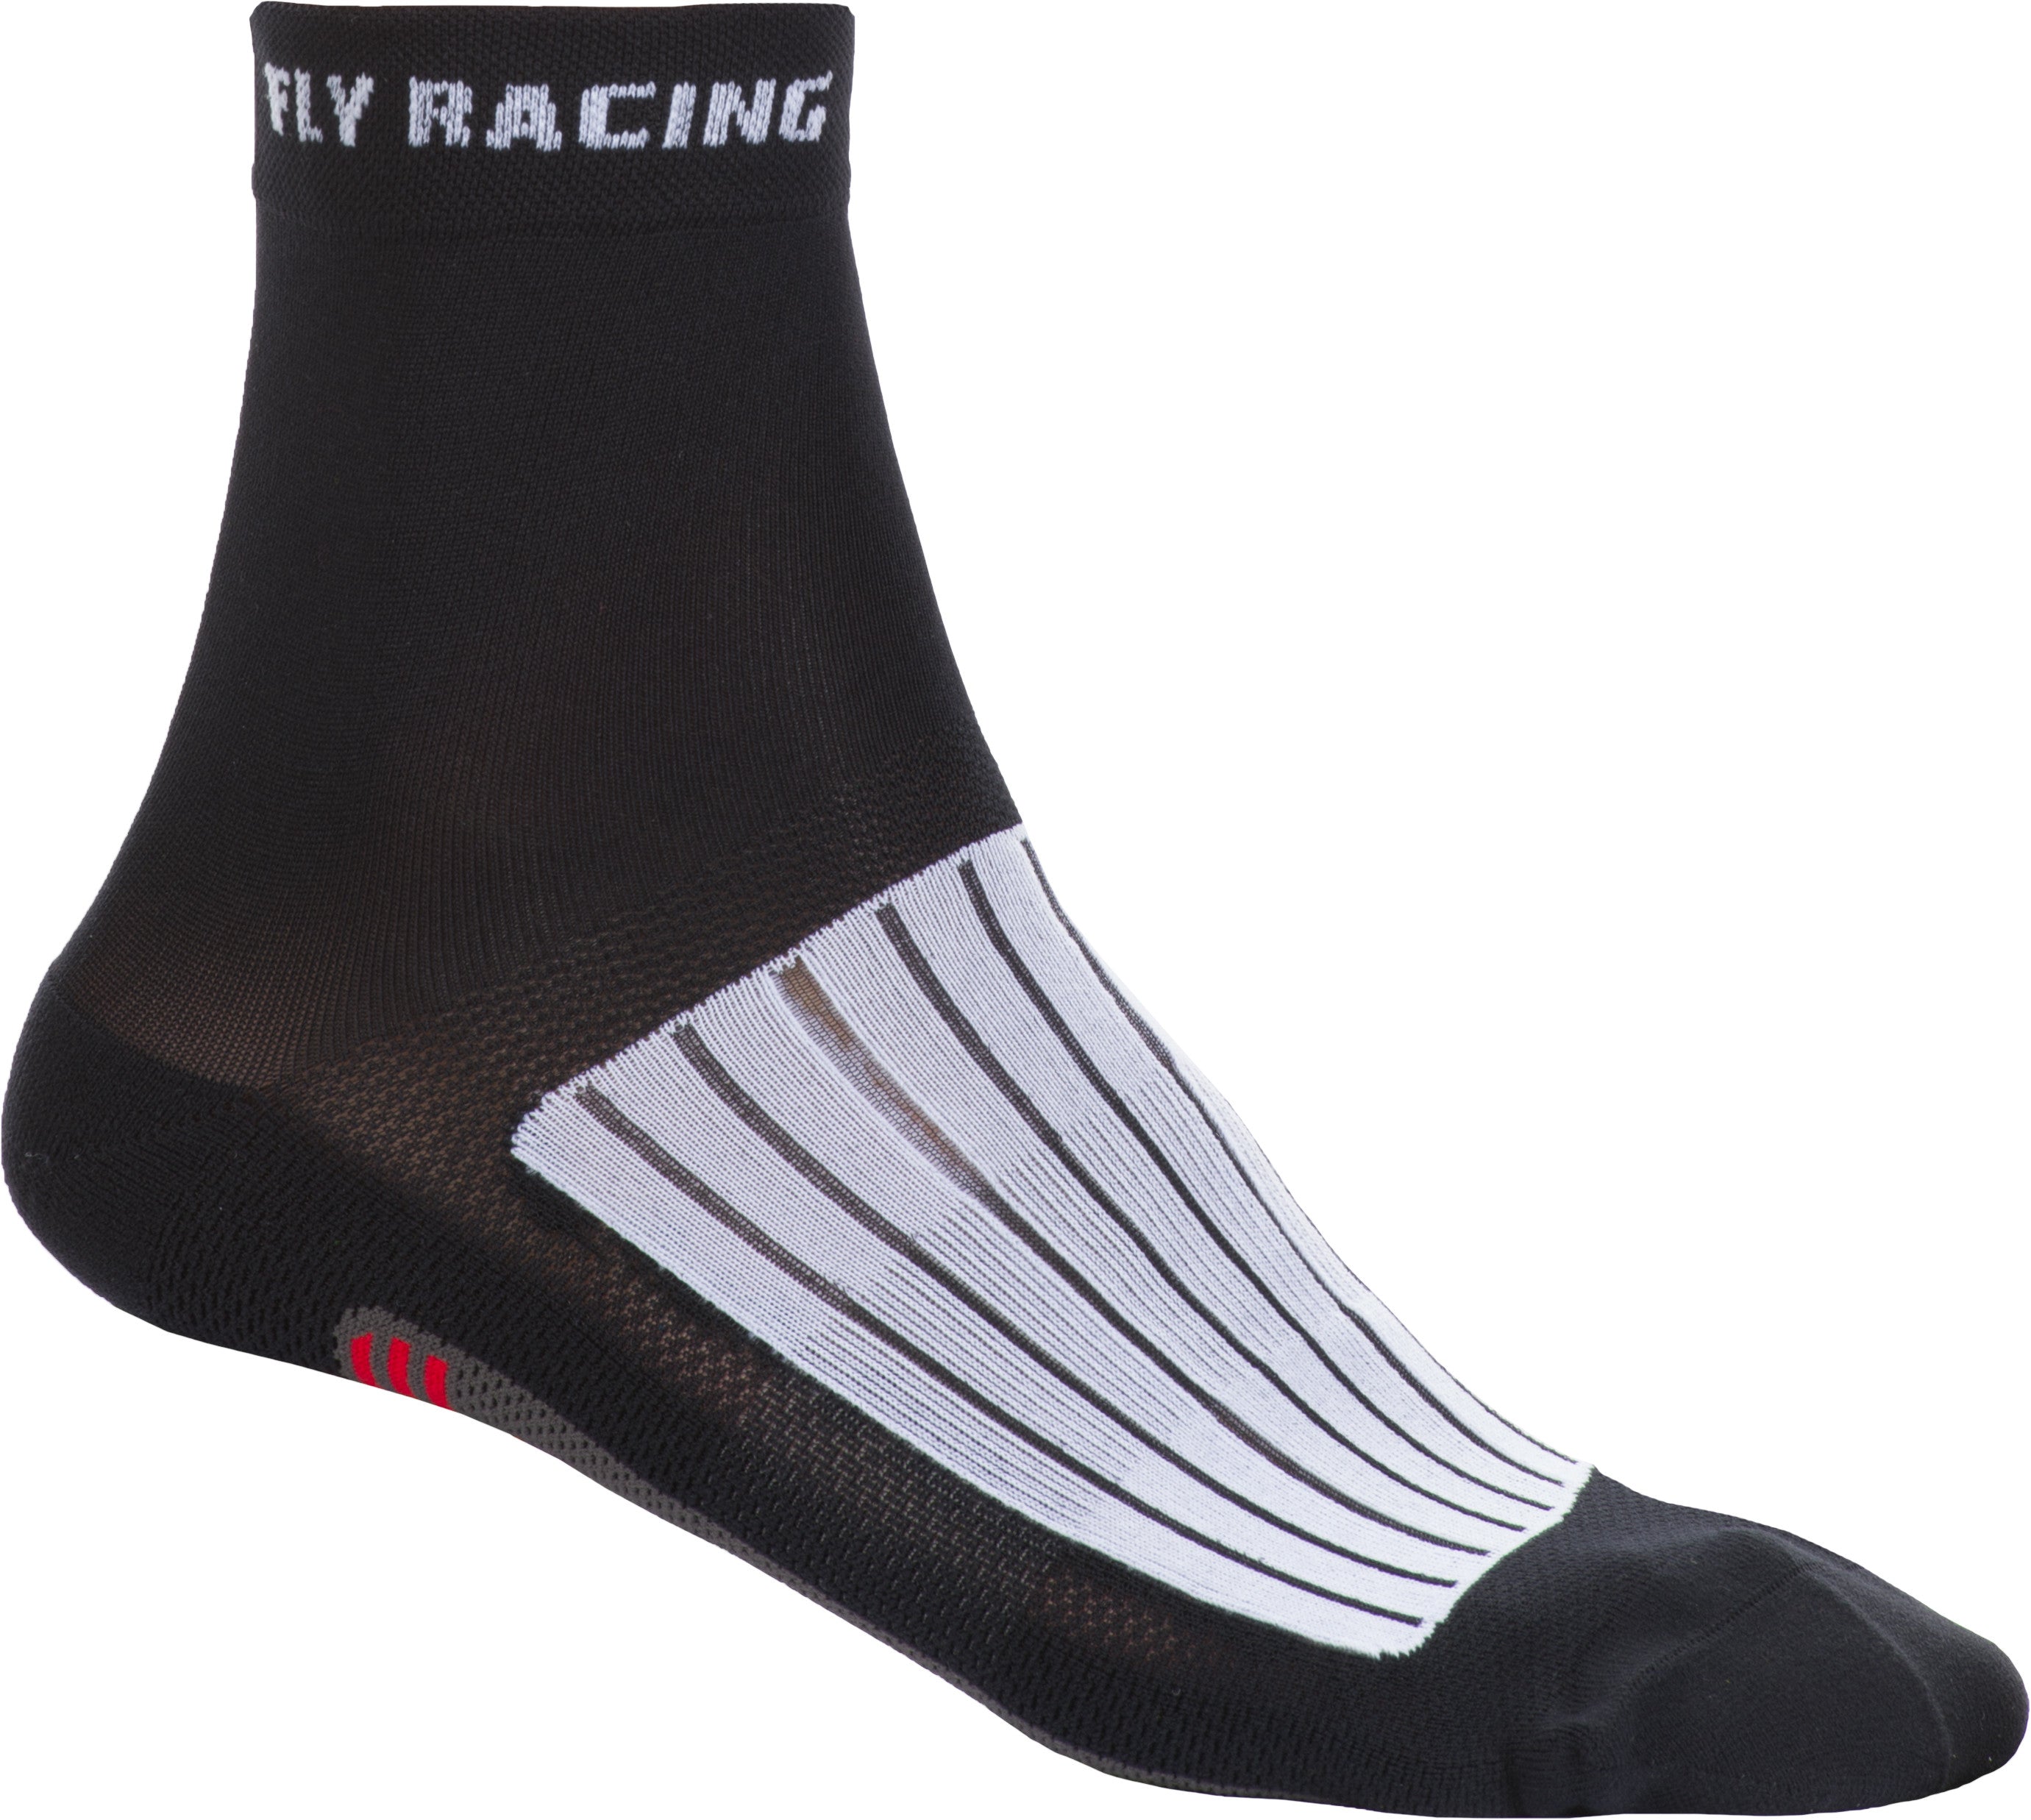 FLY RACING, FLY RACING FLY ACTION SOCKS BLACK/WHITE/RED SM/MD SPX009599-A1